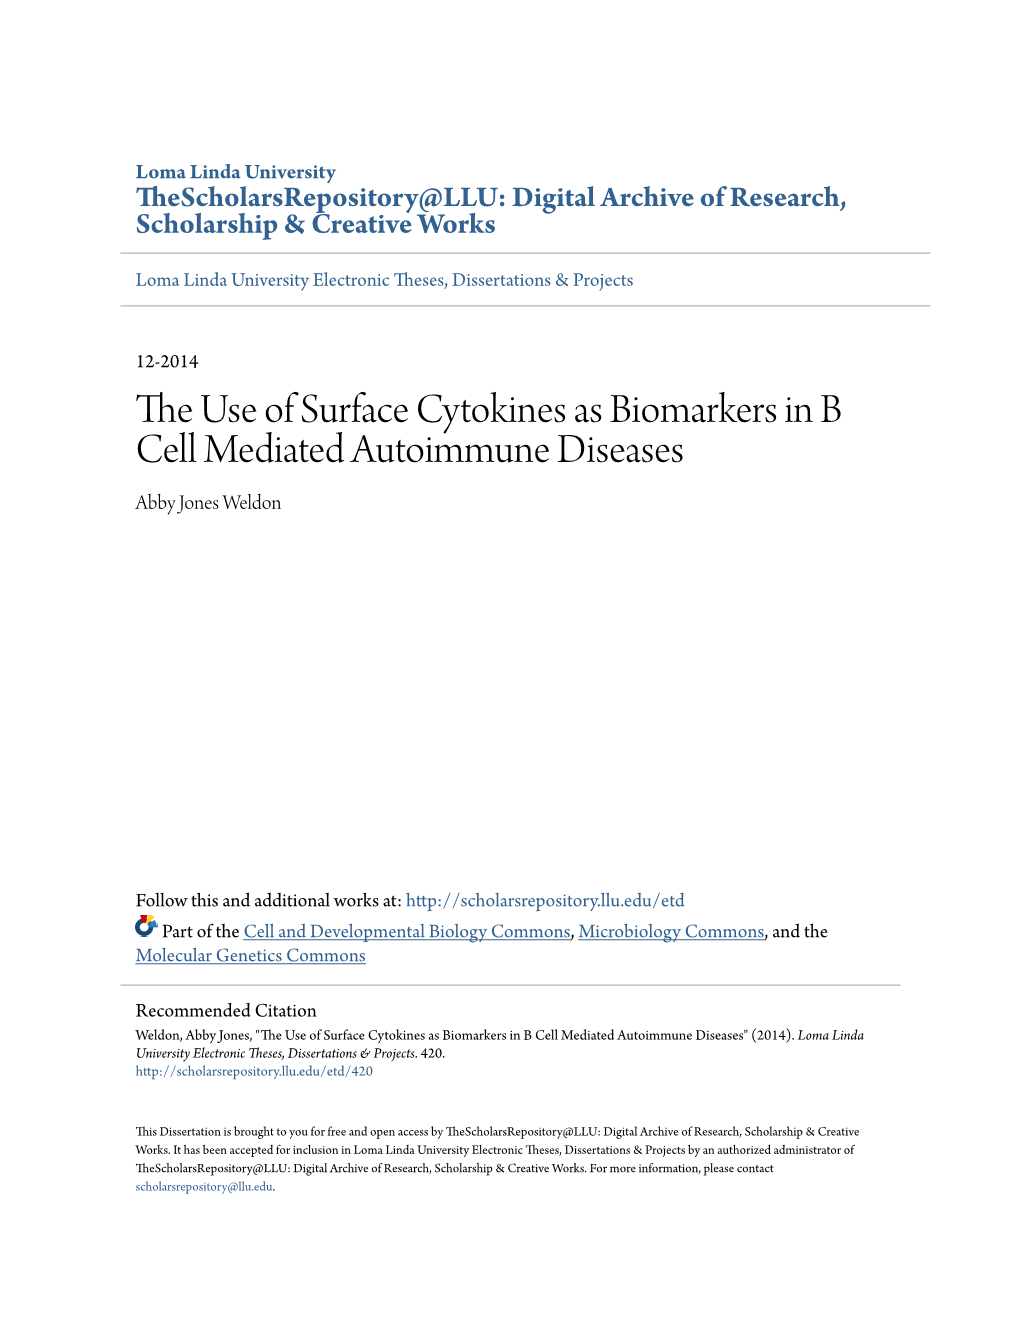 The Use of Surface Cytokines As Biomarkers in B Cell Mediated Autoimmune Diseases